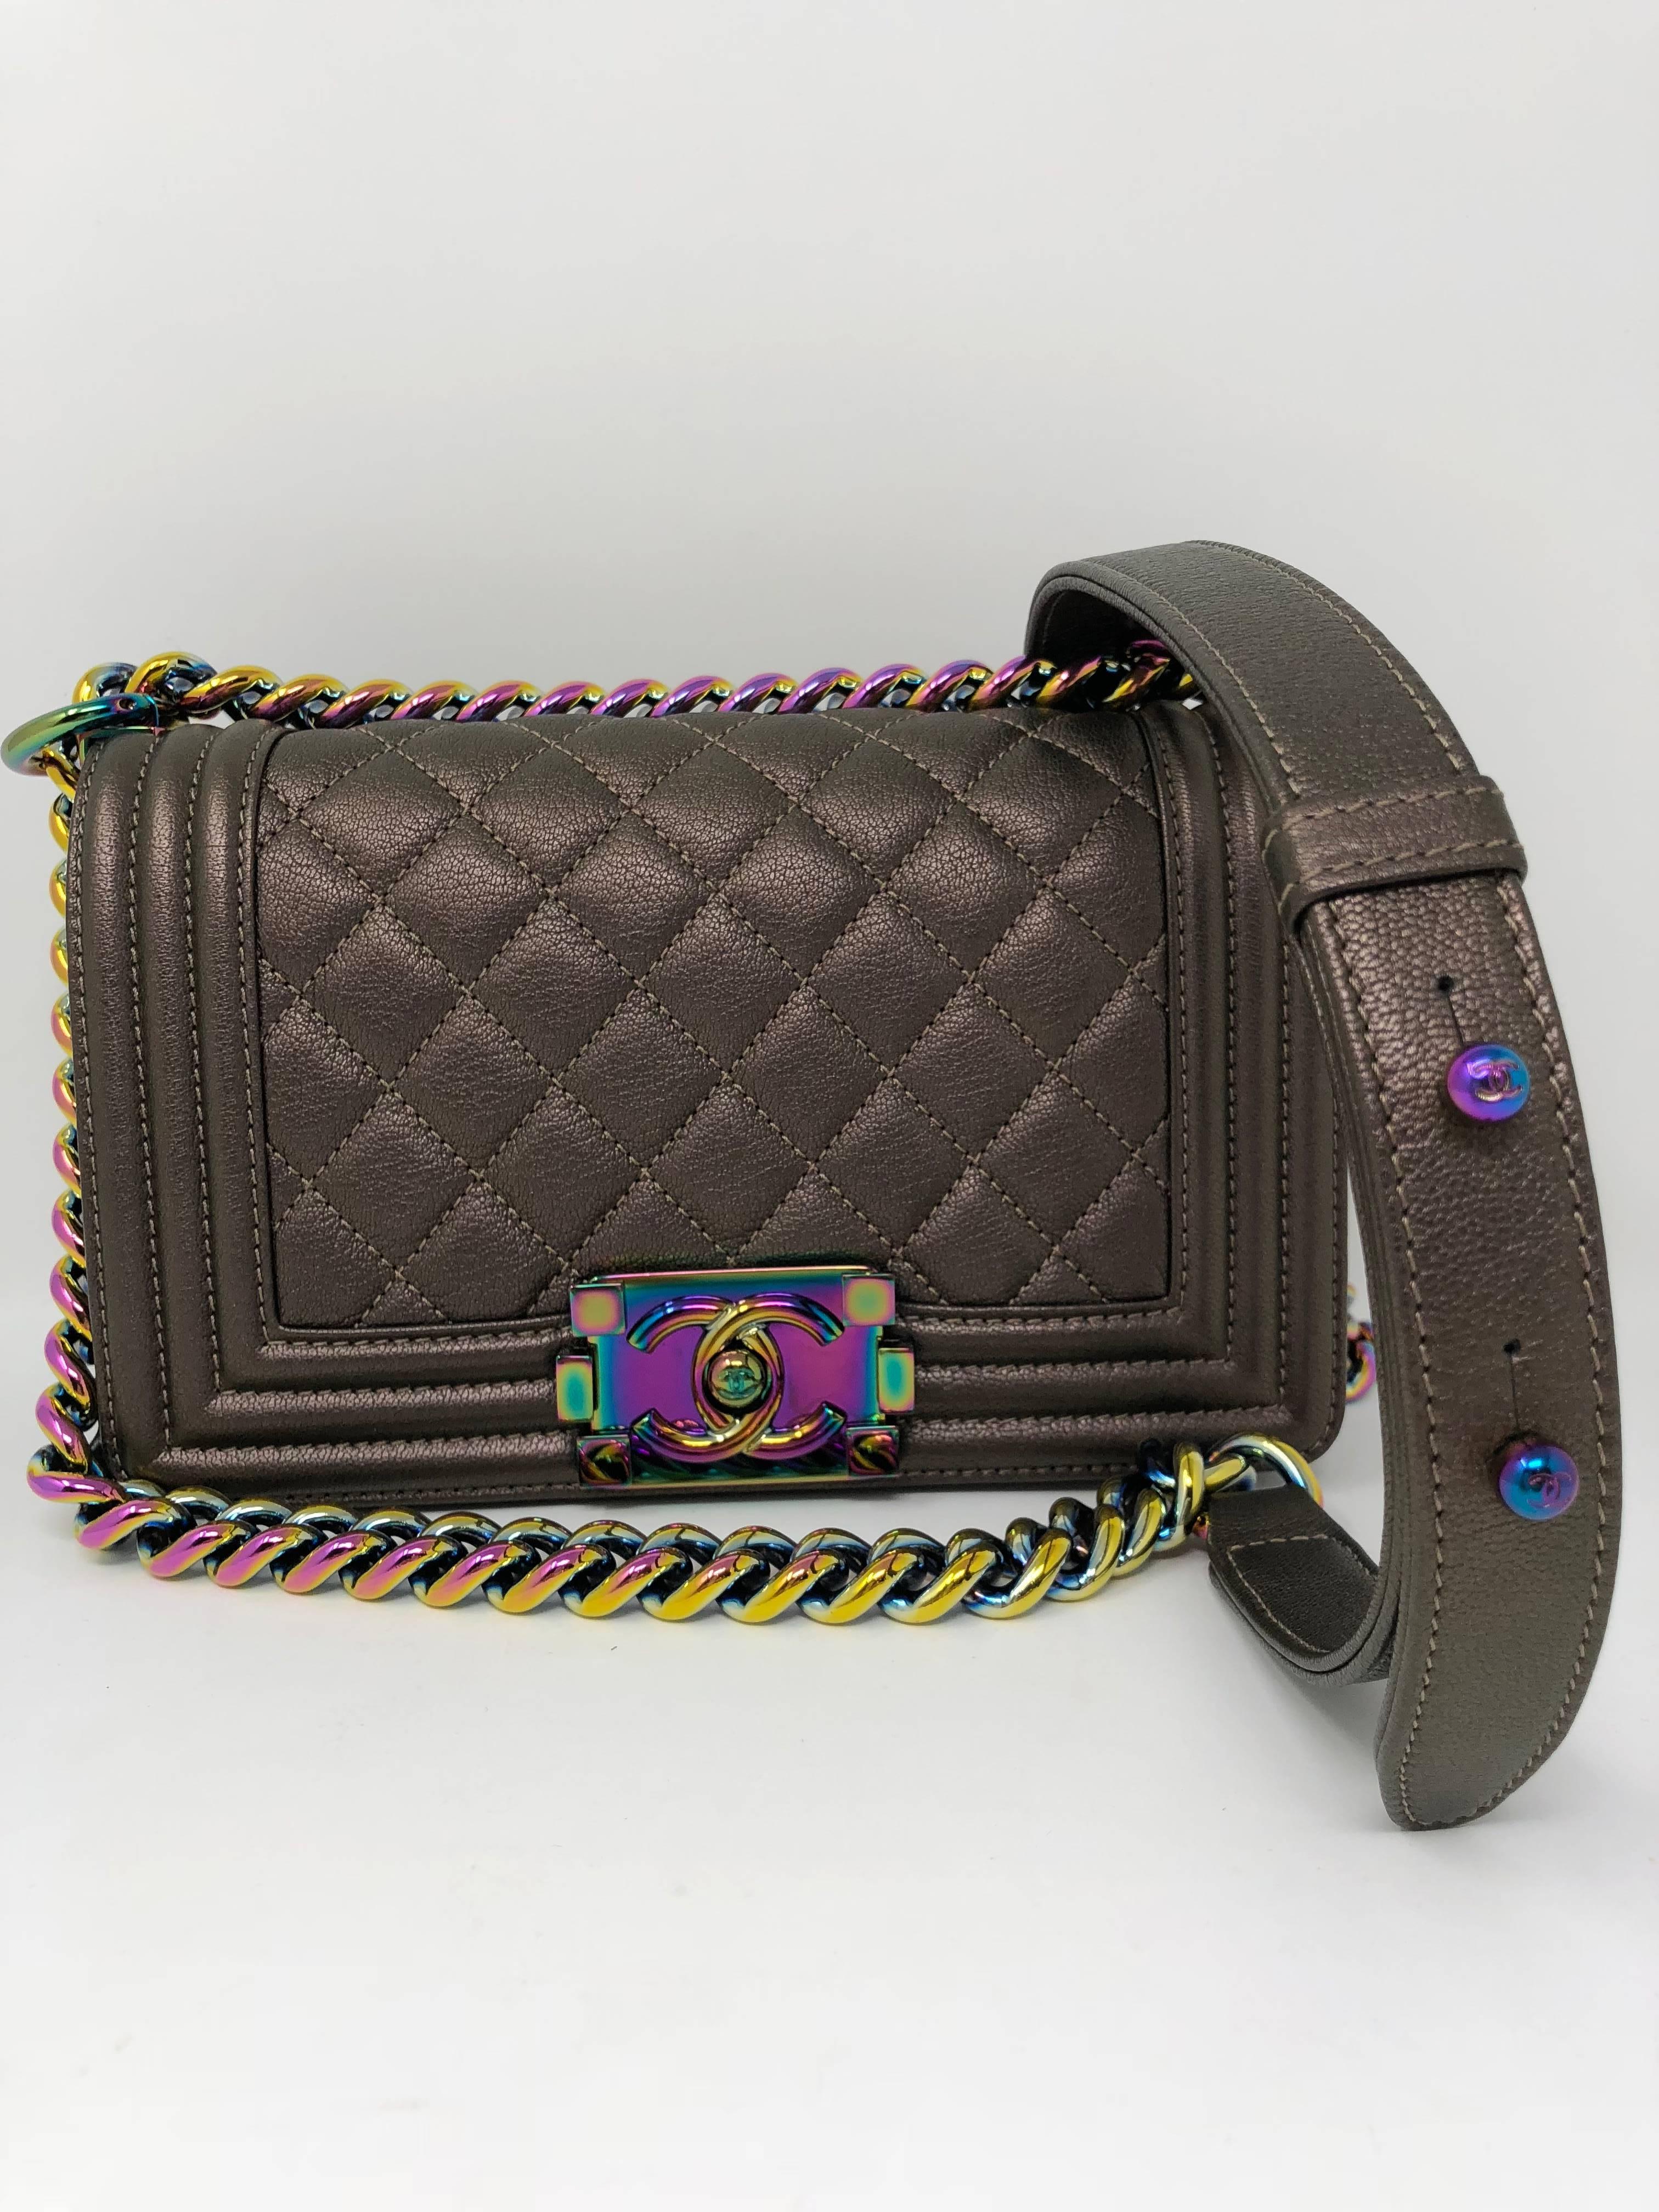 Authentic Chanel small Le Boy Flap Bag with rainbow hardware from the Cruise 2016 Collection. The bag is made of iridescent goat skin in bronze with rainbow hardware and strap. Limited edition and sold out with a waitlist worldwide. The color is